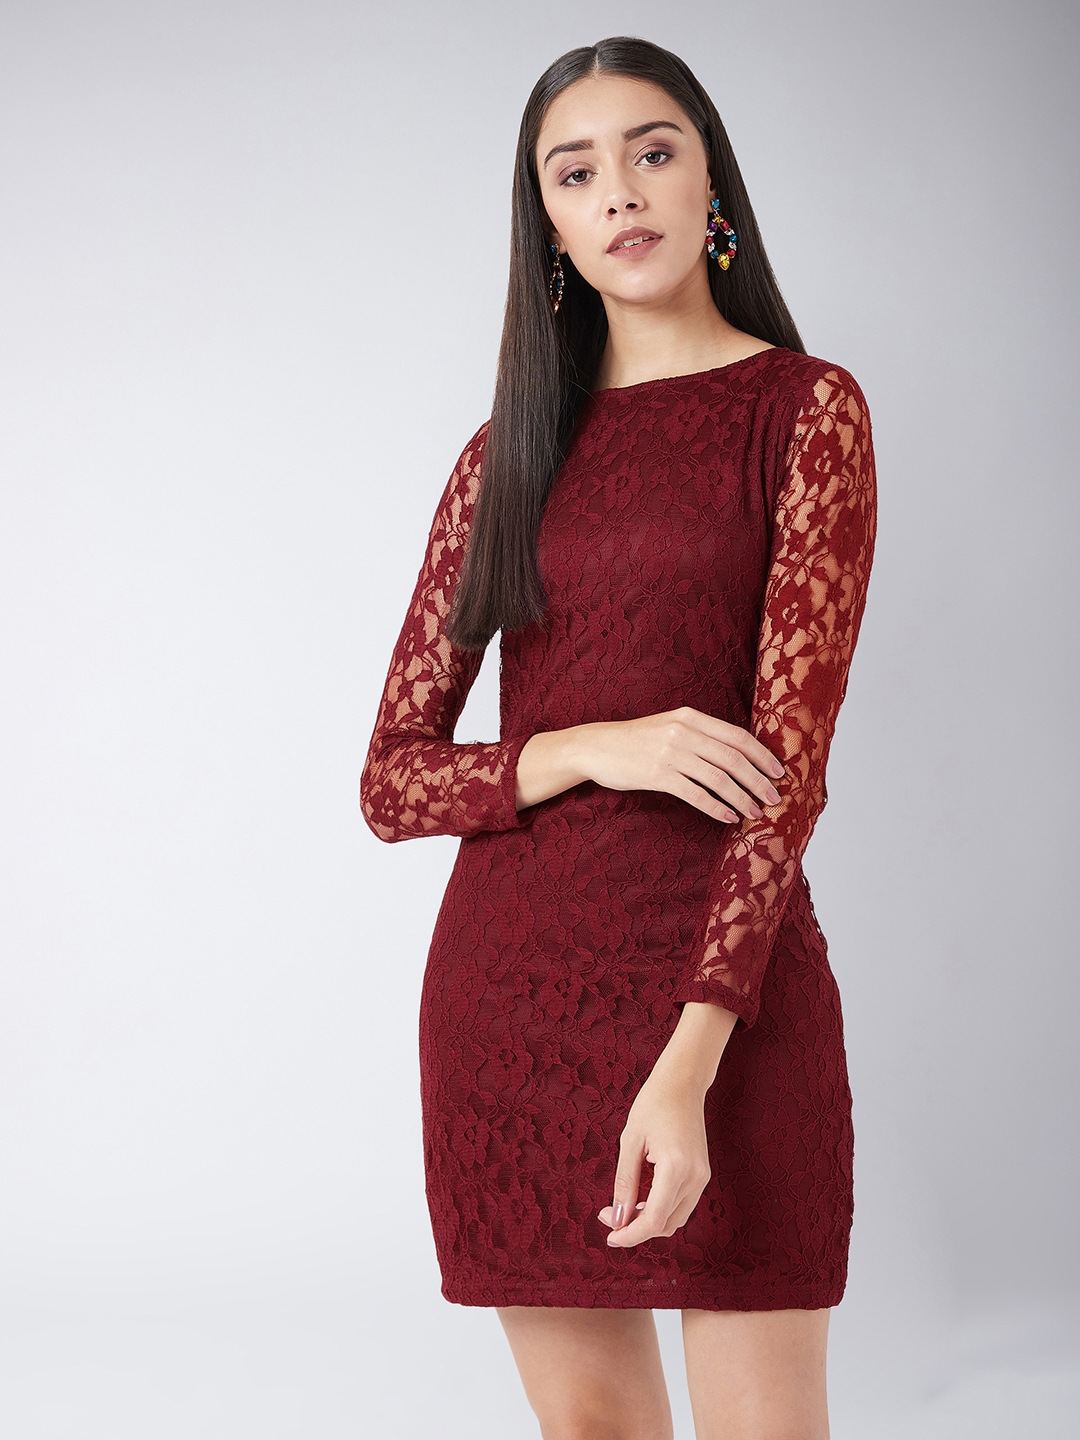 Maroon Dresses - Buy Maroon Dress Online for Women & Girls in India at  Myntra